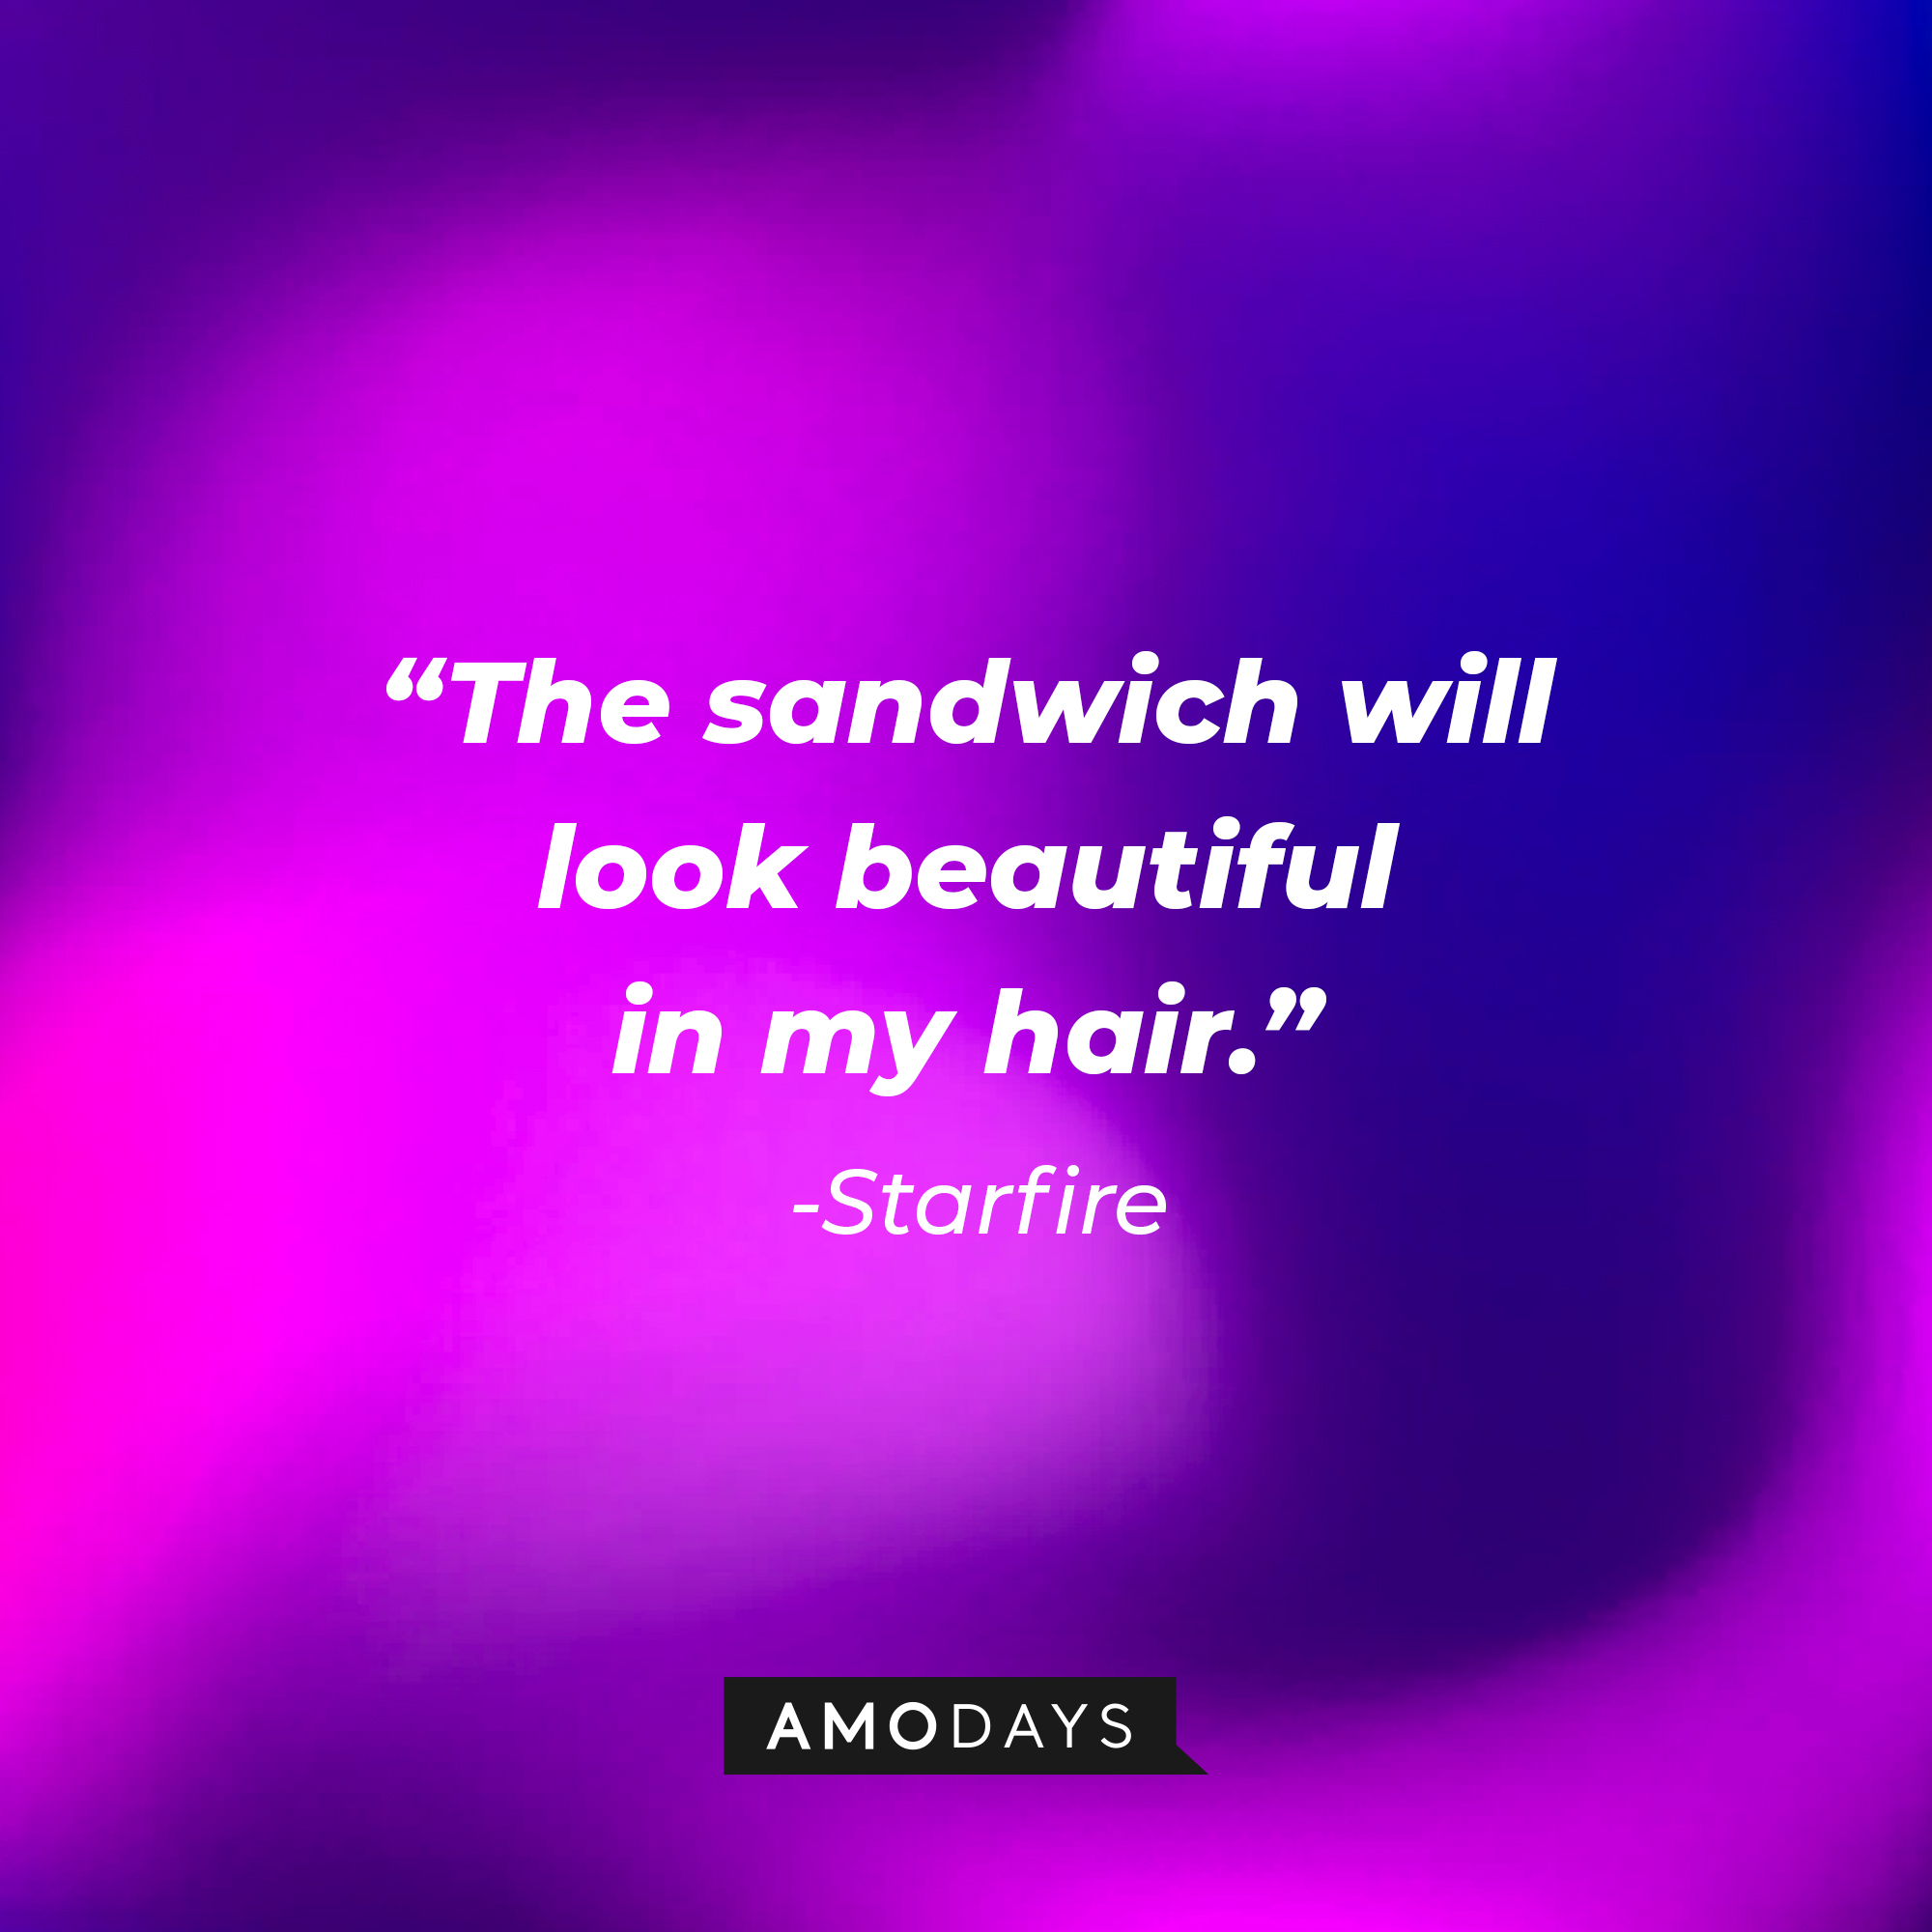 Starfire’s quote: "The sandwich will look beautiful in my hair." | Source: AmoDays